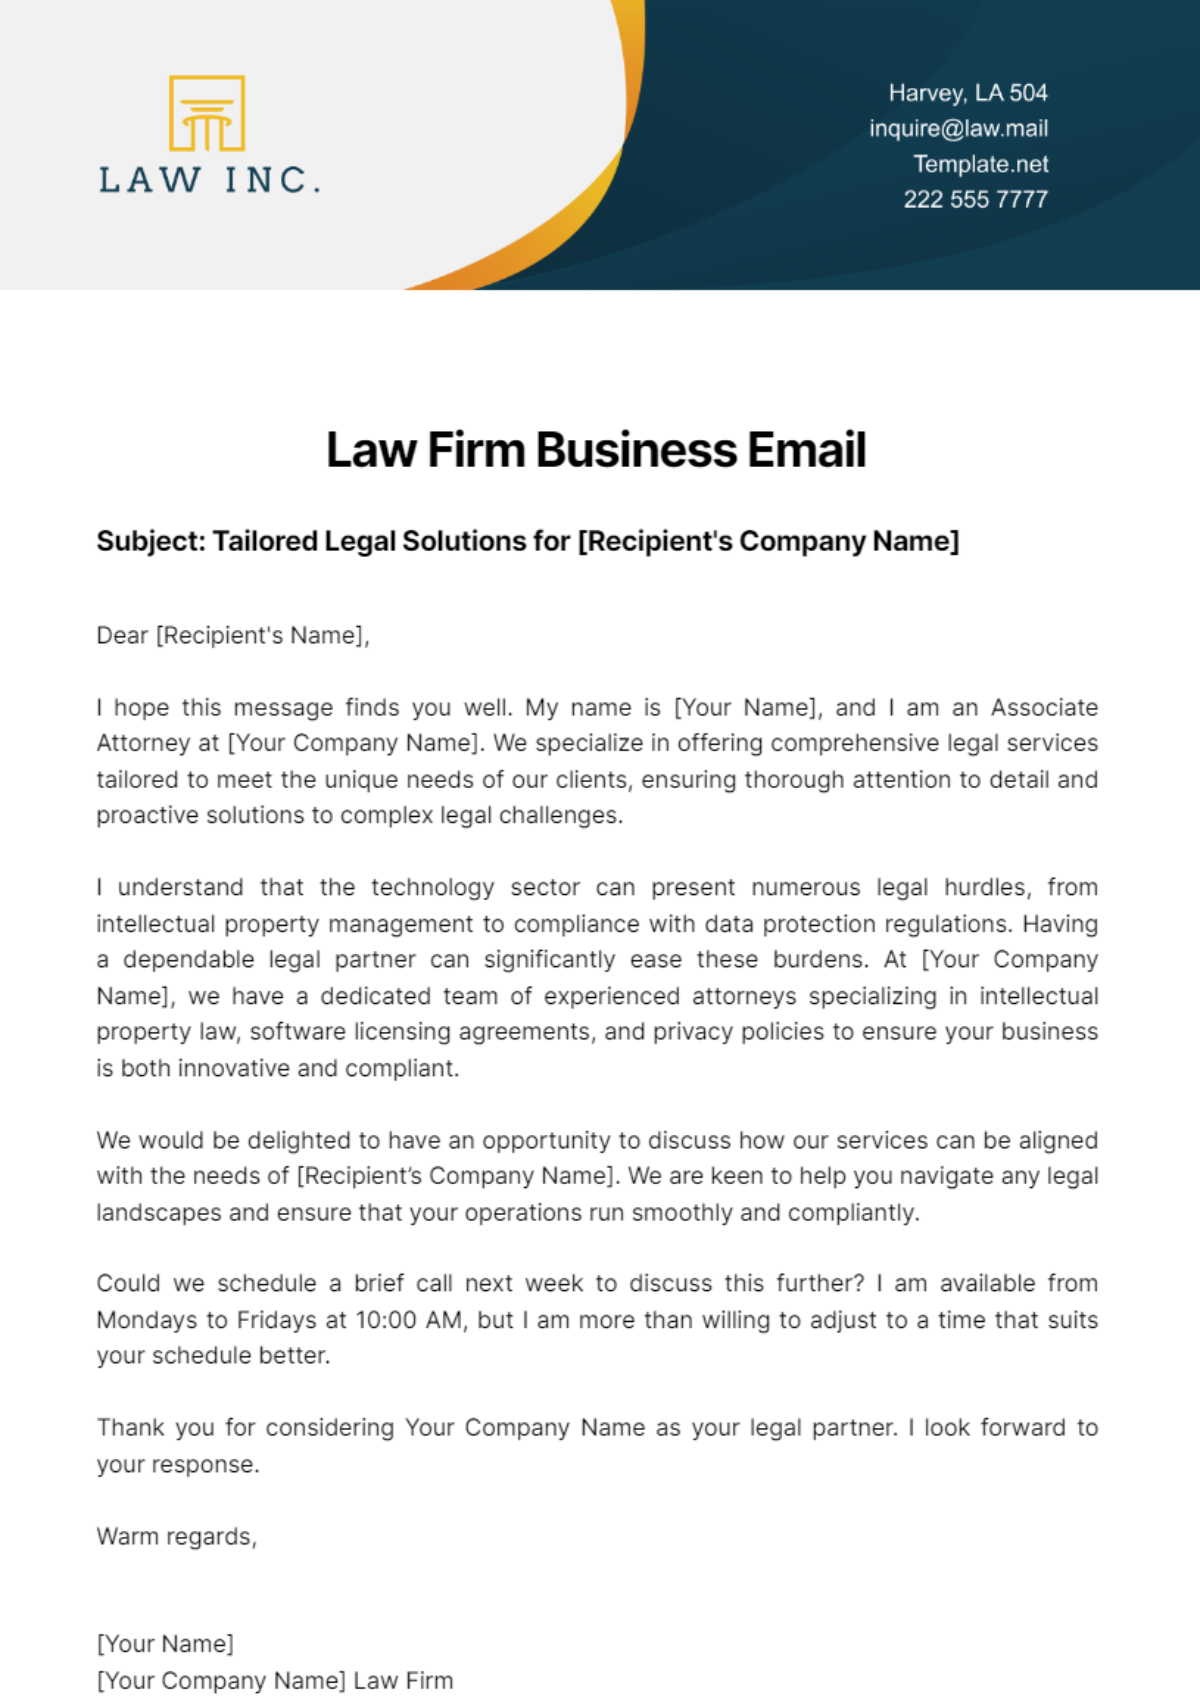 Law Firm Business Email Template